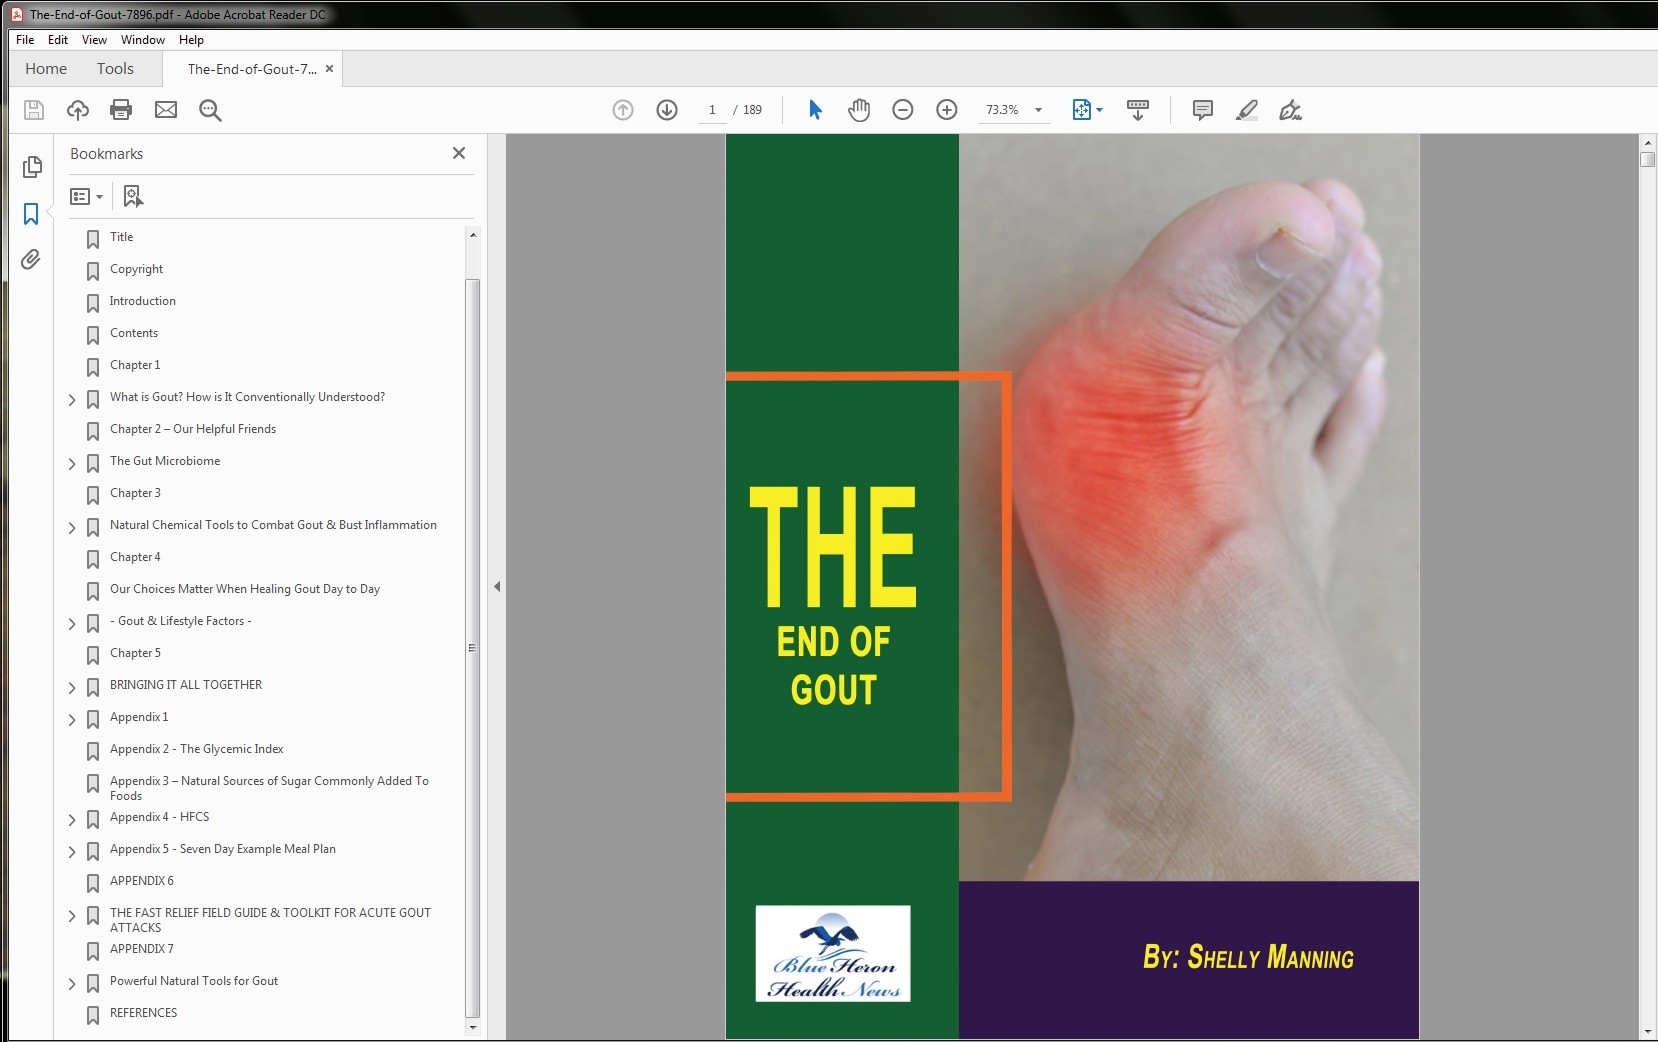 The End of Gout Review: Does Shelly